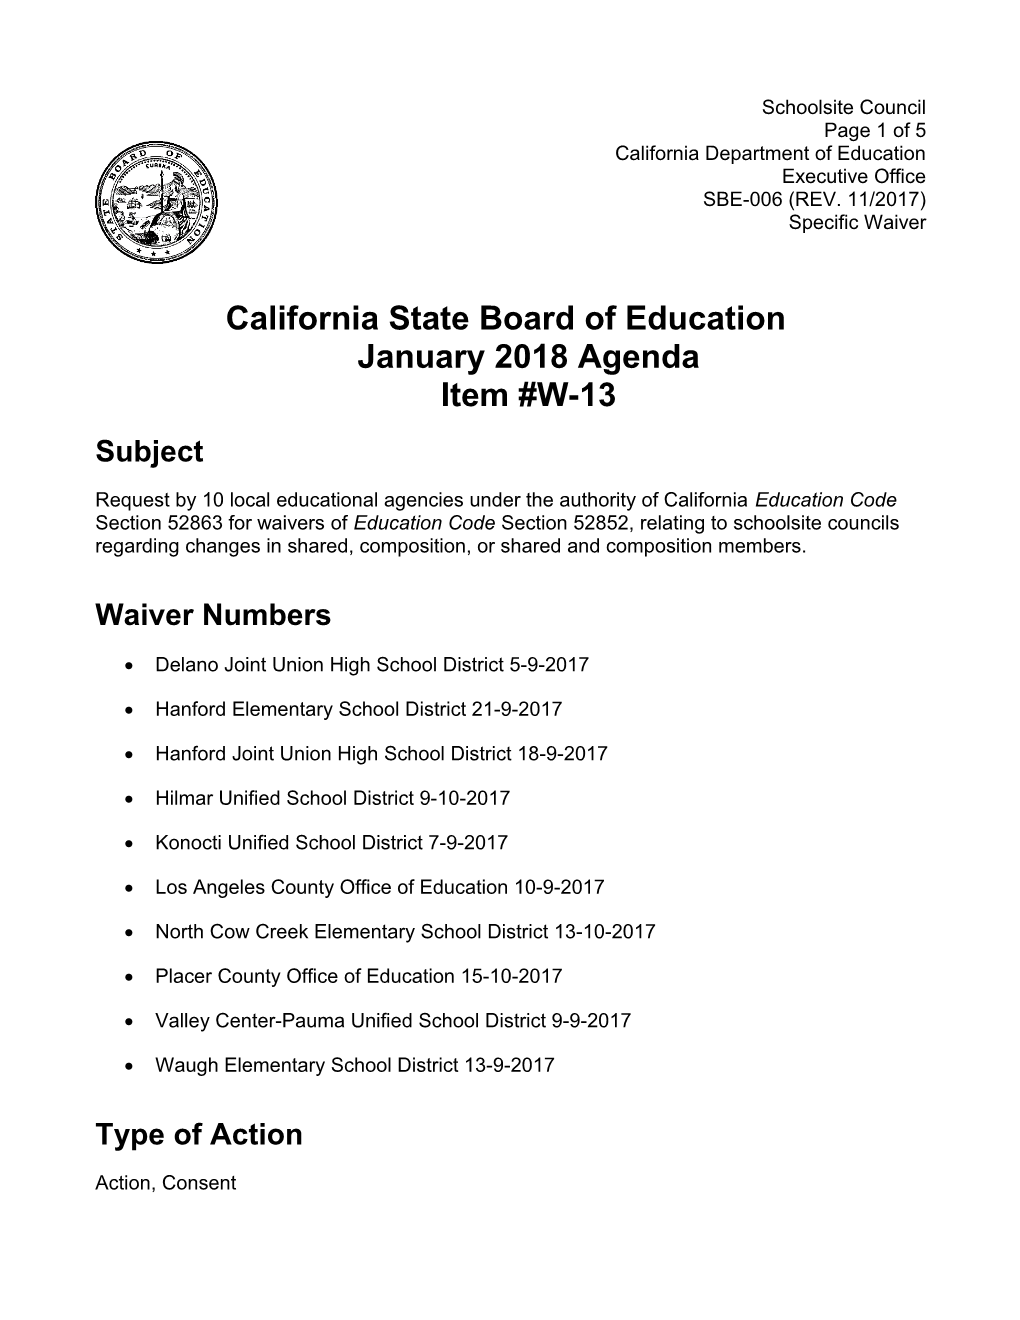 January 2018 Waiver Item W-13 - Meeting Agendas (CA State Board of Education)